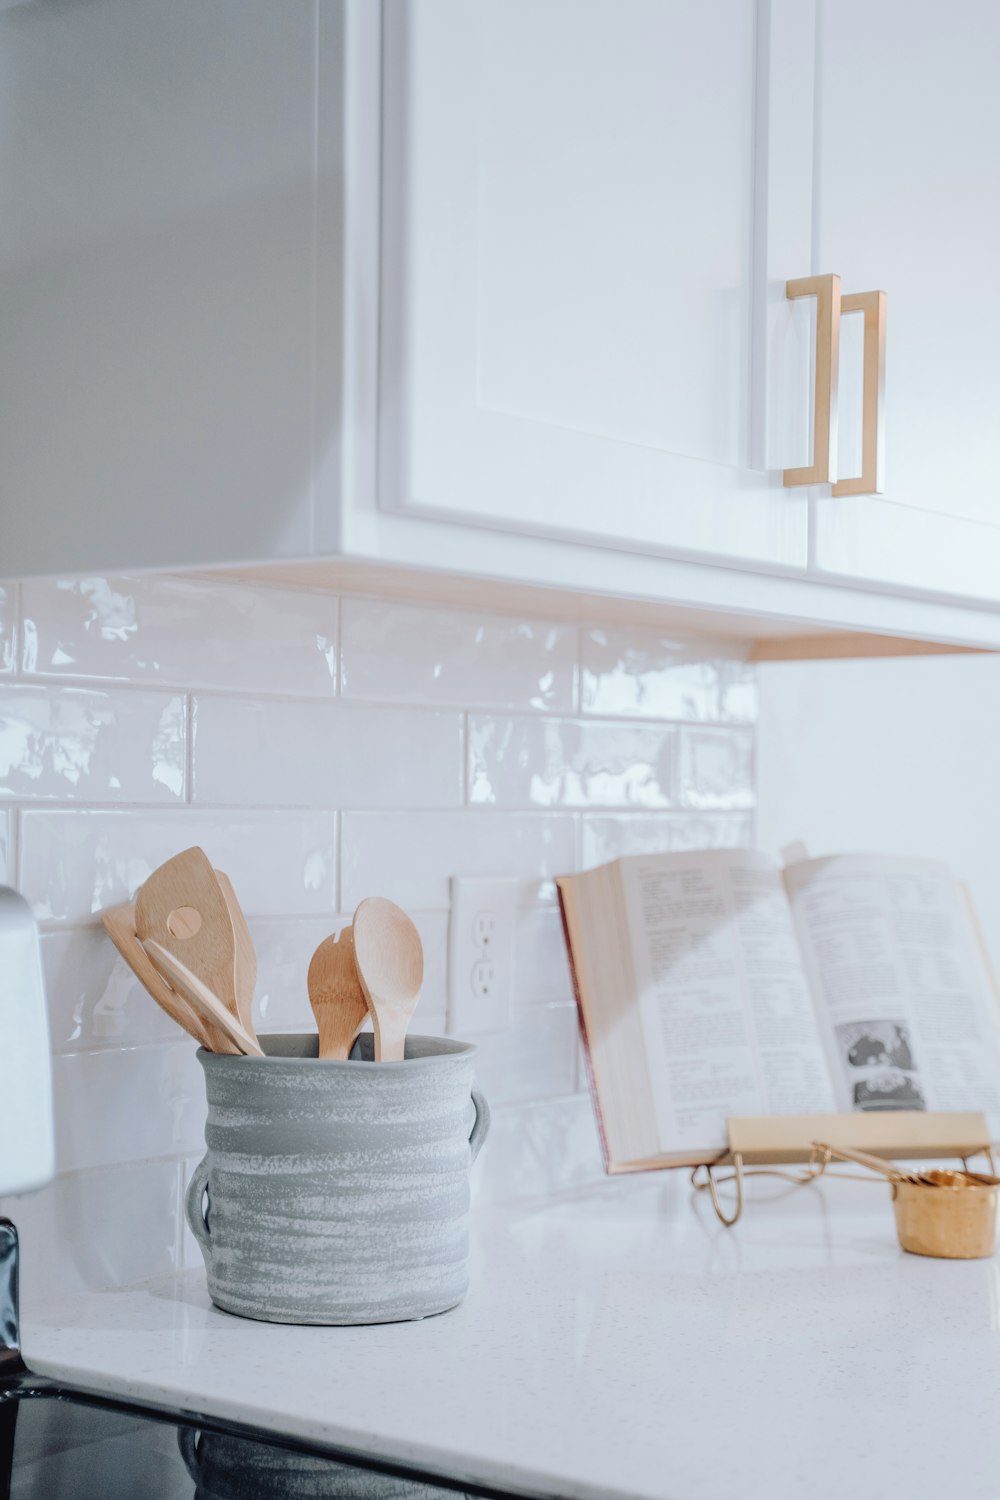 a kitchen counter with a book and wooden utensils